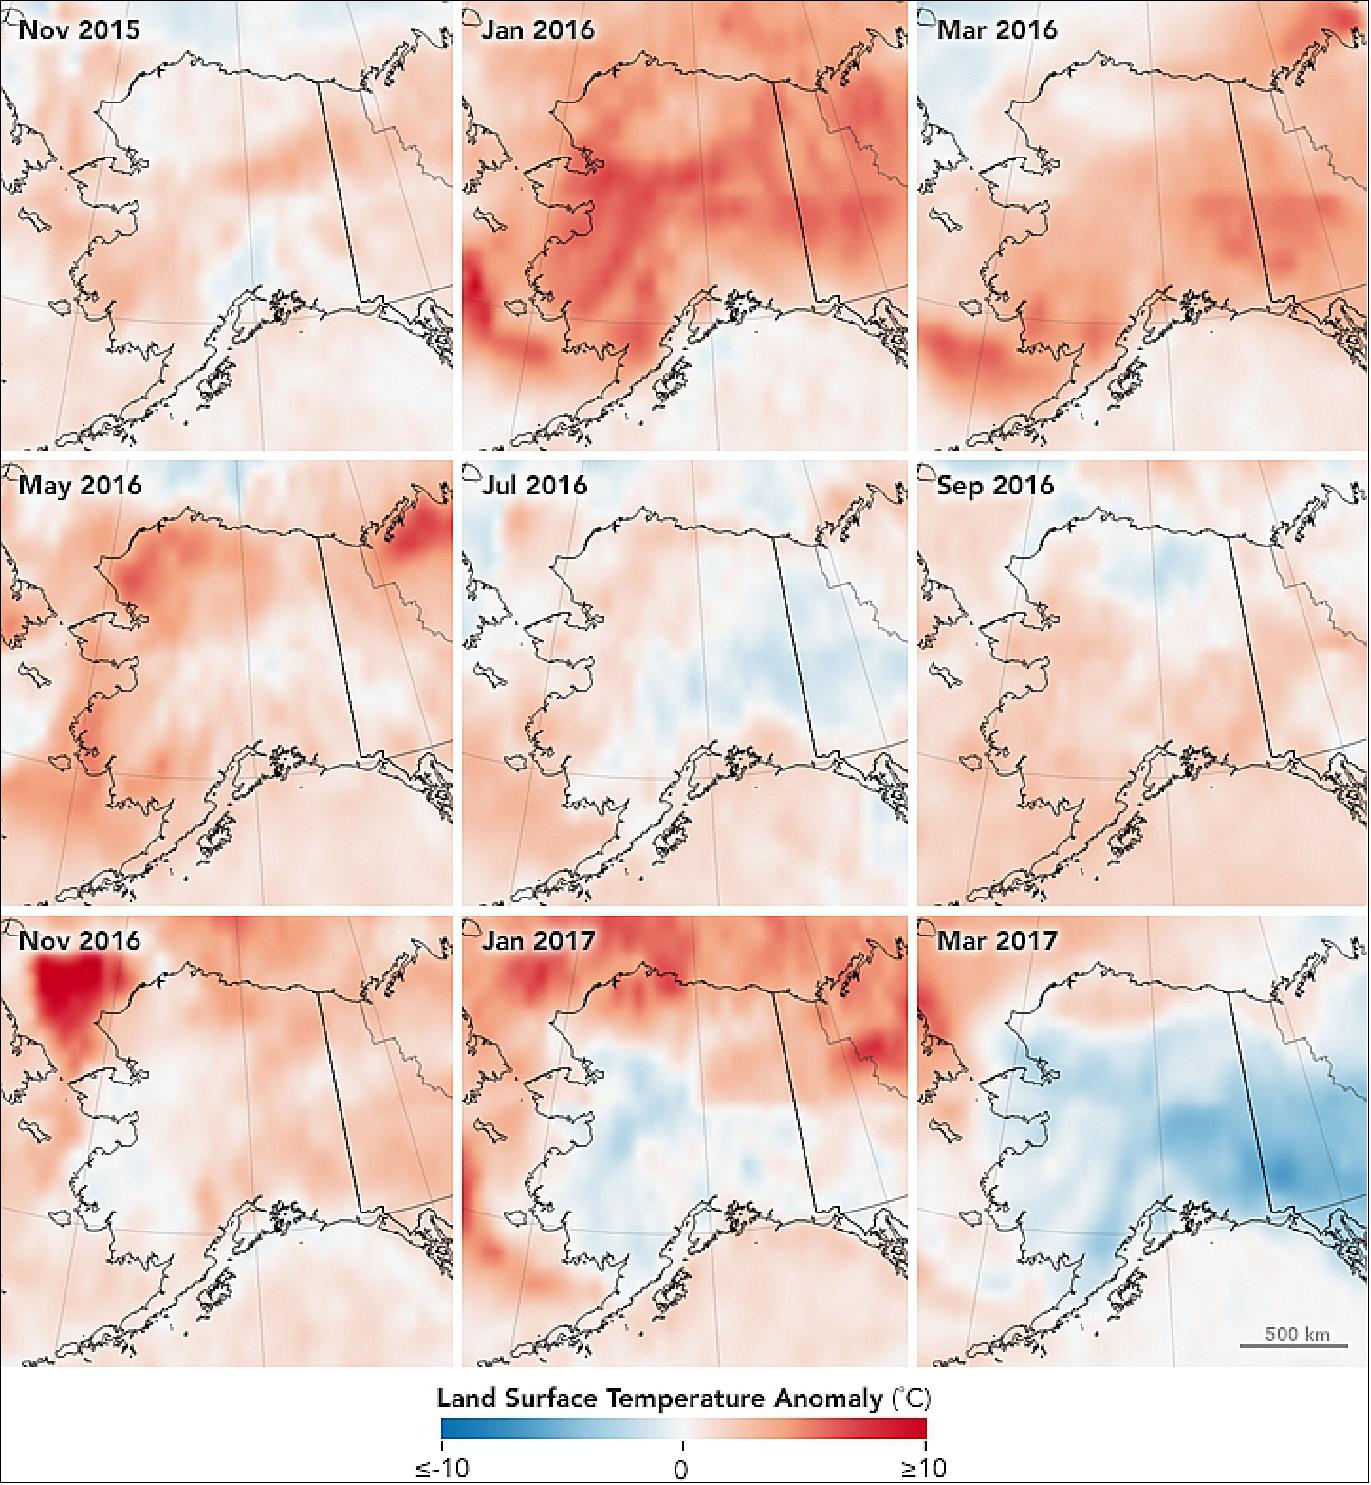 Figure 104: Alaska LSTs observed by the AIRS instrument on NASA's Aqua satellite in the period November 2015 to March 2017 (image credit: NASA Earth Observatory, images by Jesse Allen using AIRS LST data provided by the AIRS Team)